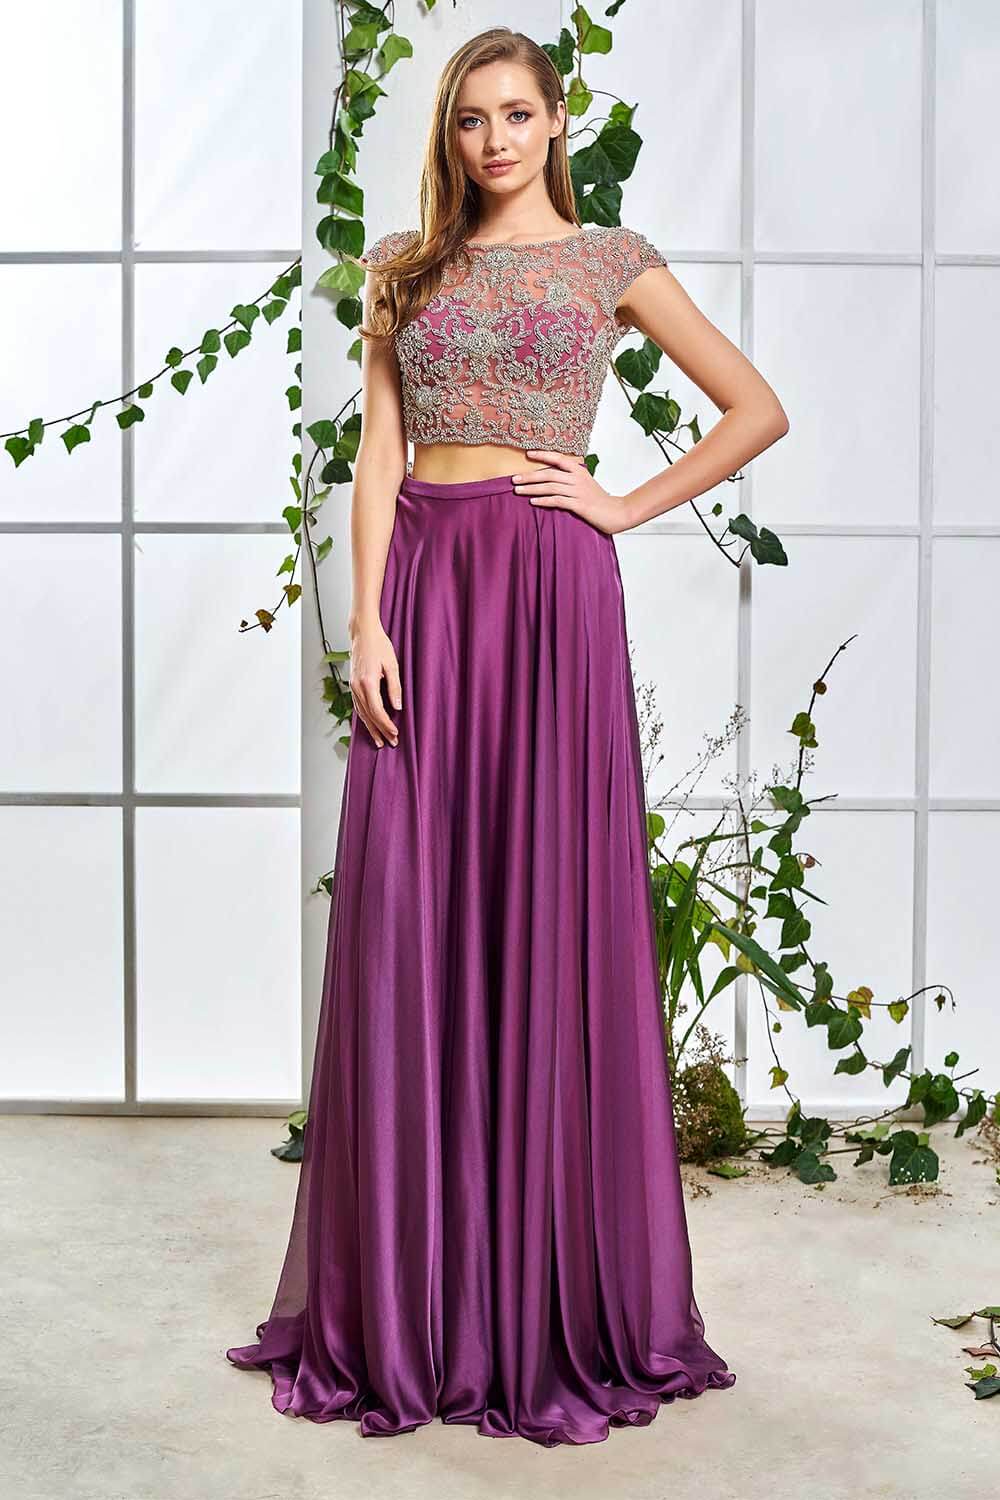 Stone Embroidered Transparent Purple Long Evening Dress